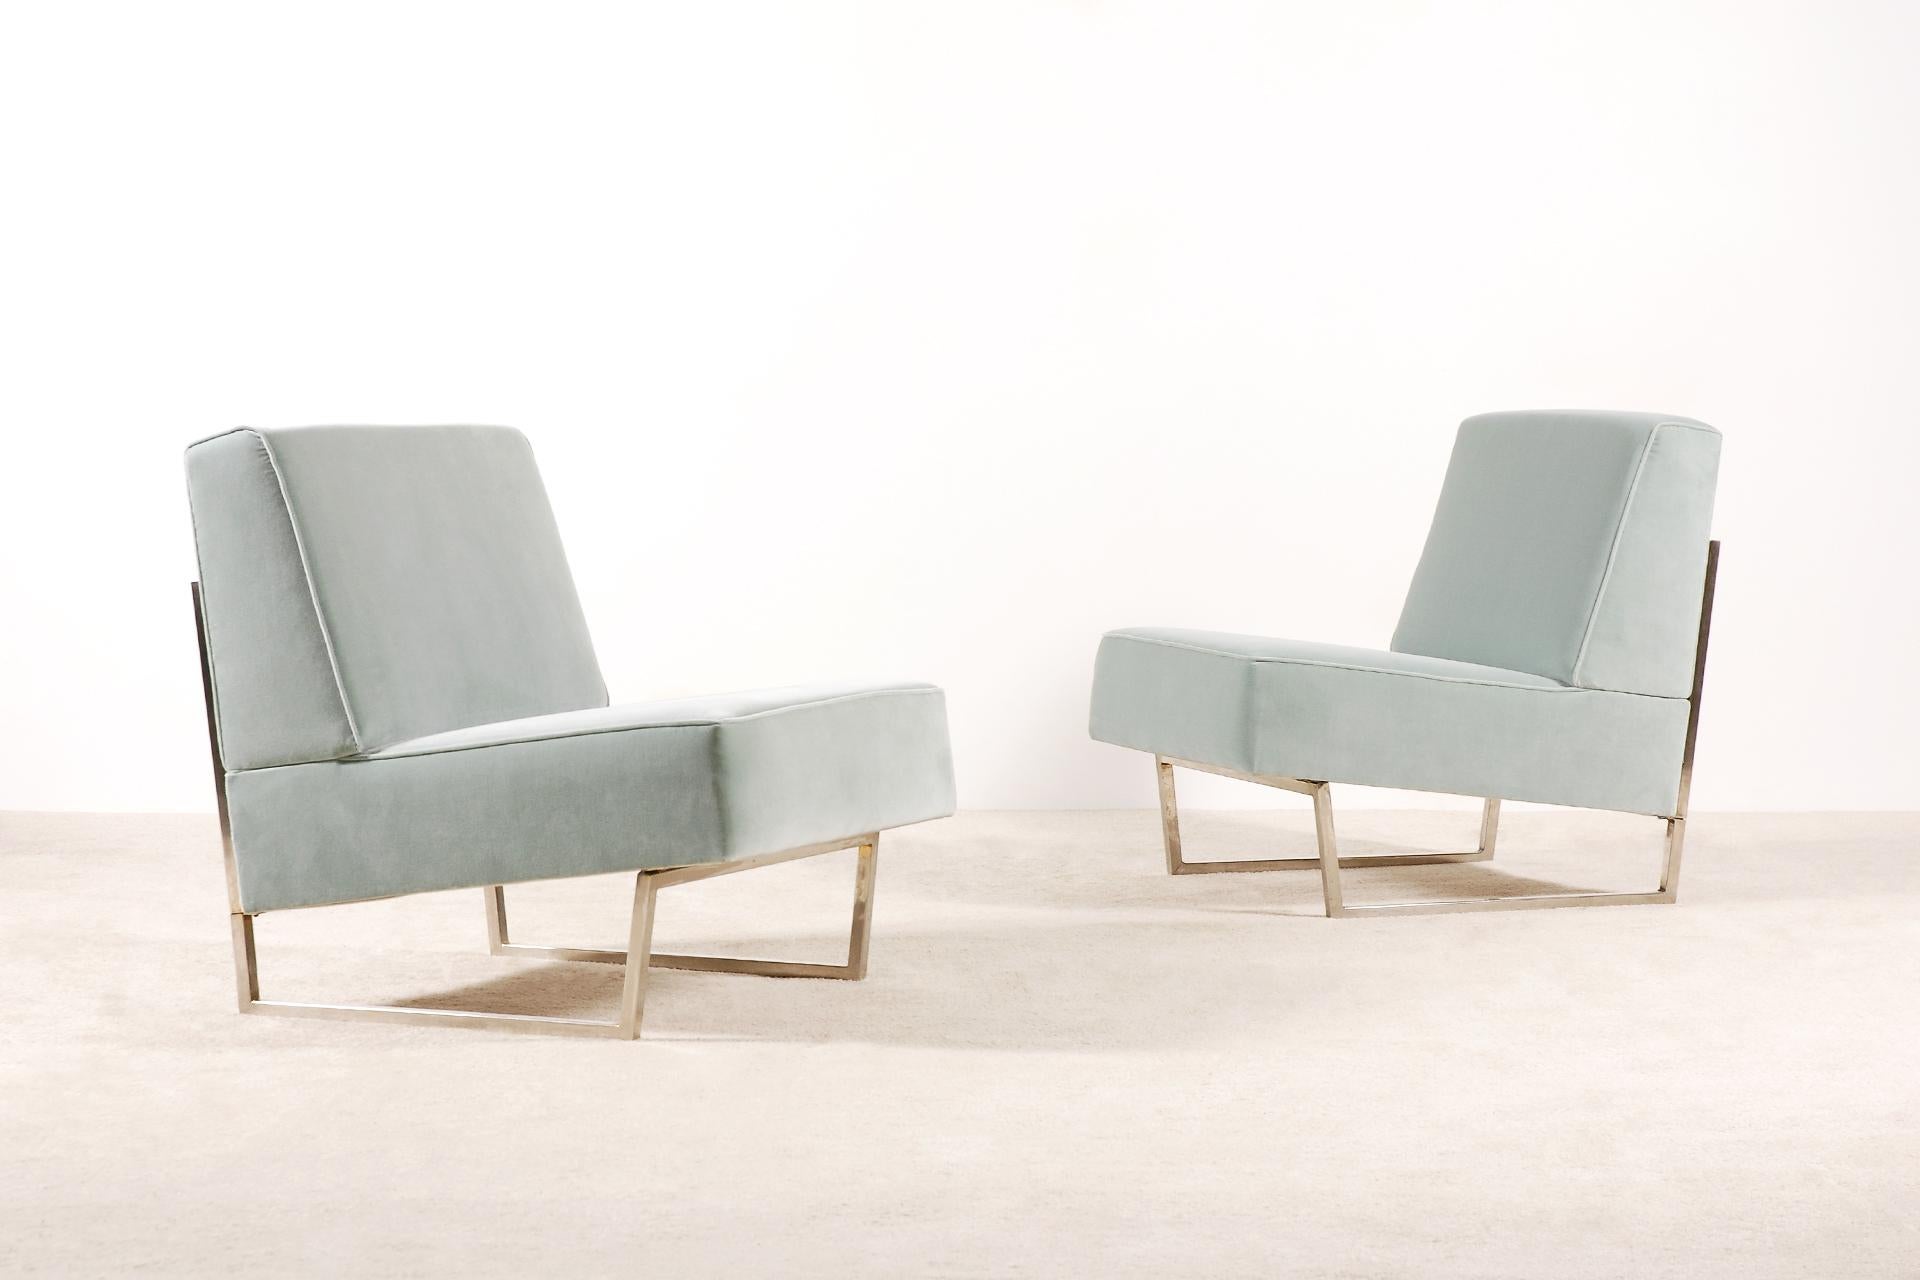 Beautiful pair of lounge chairs designed by French designer Pierre Guariche.
Model 